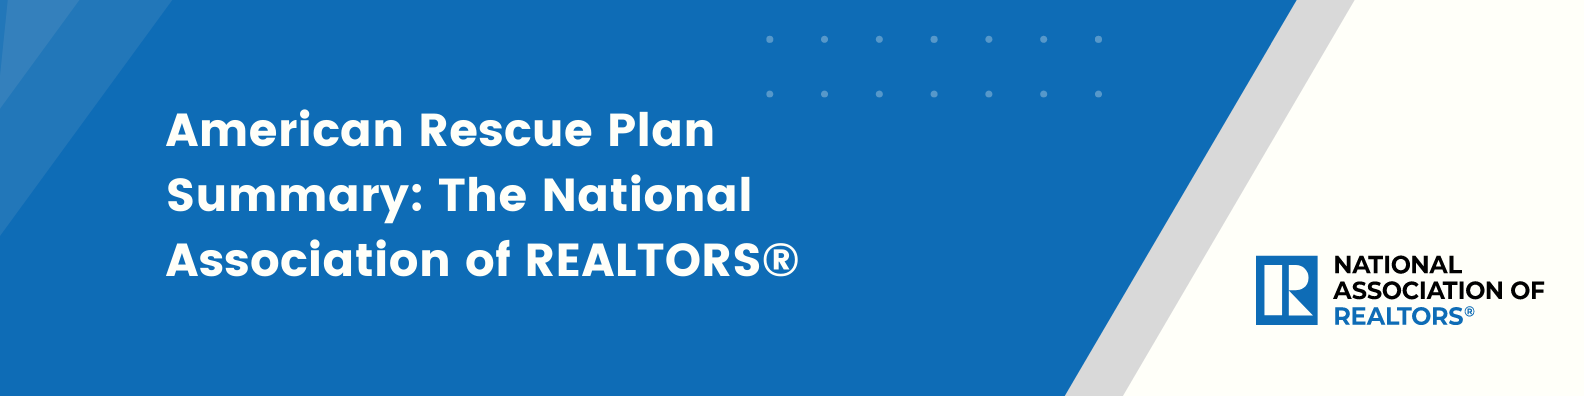 American Rescue Plan Summary The National Association of REALTORS® (Banner (Portrait))